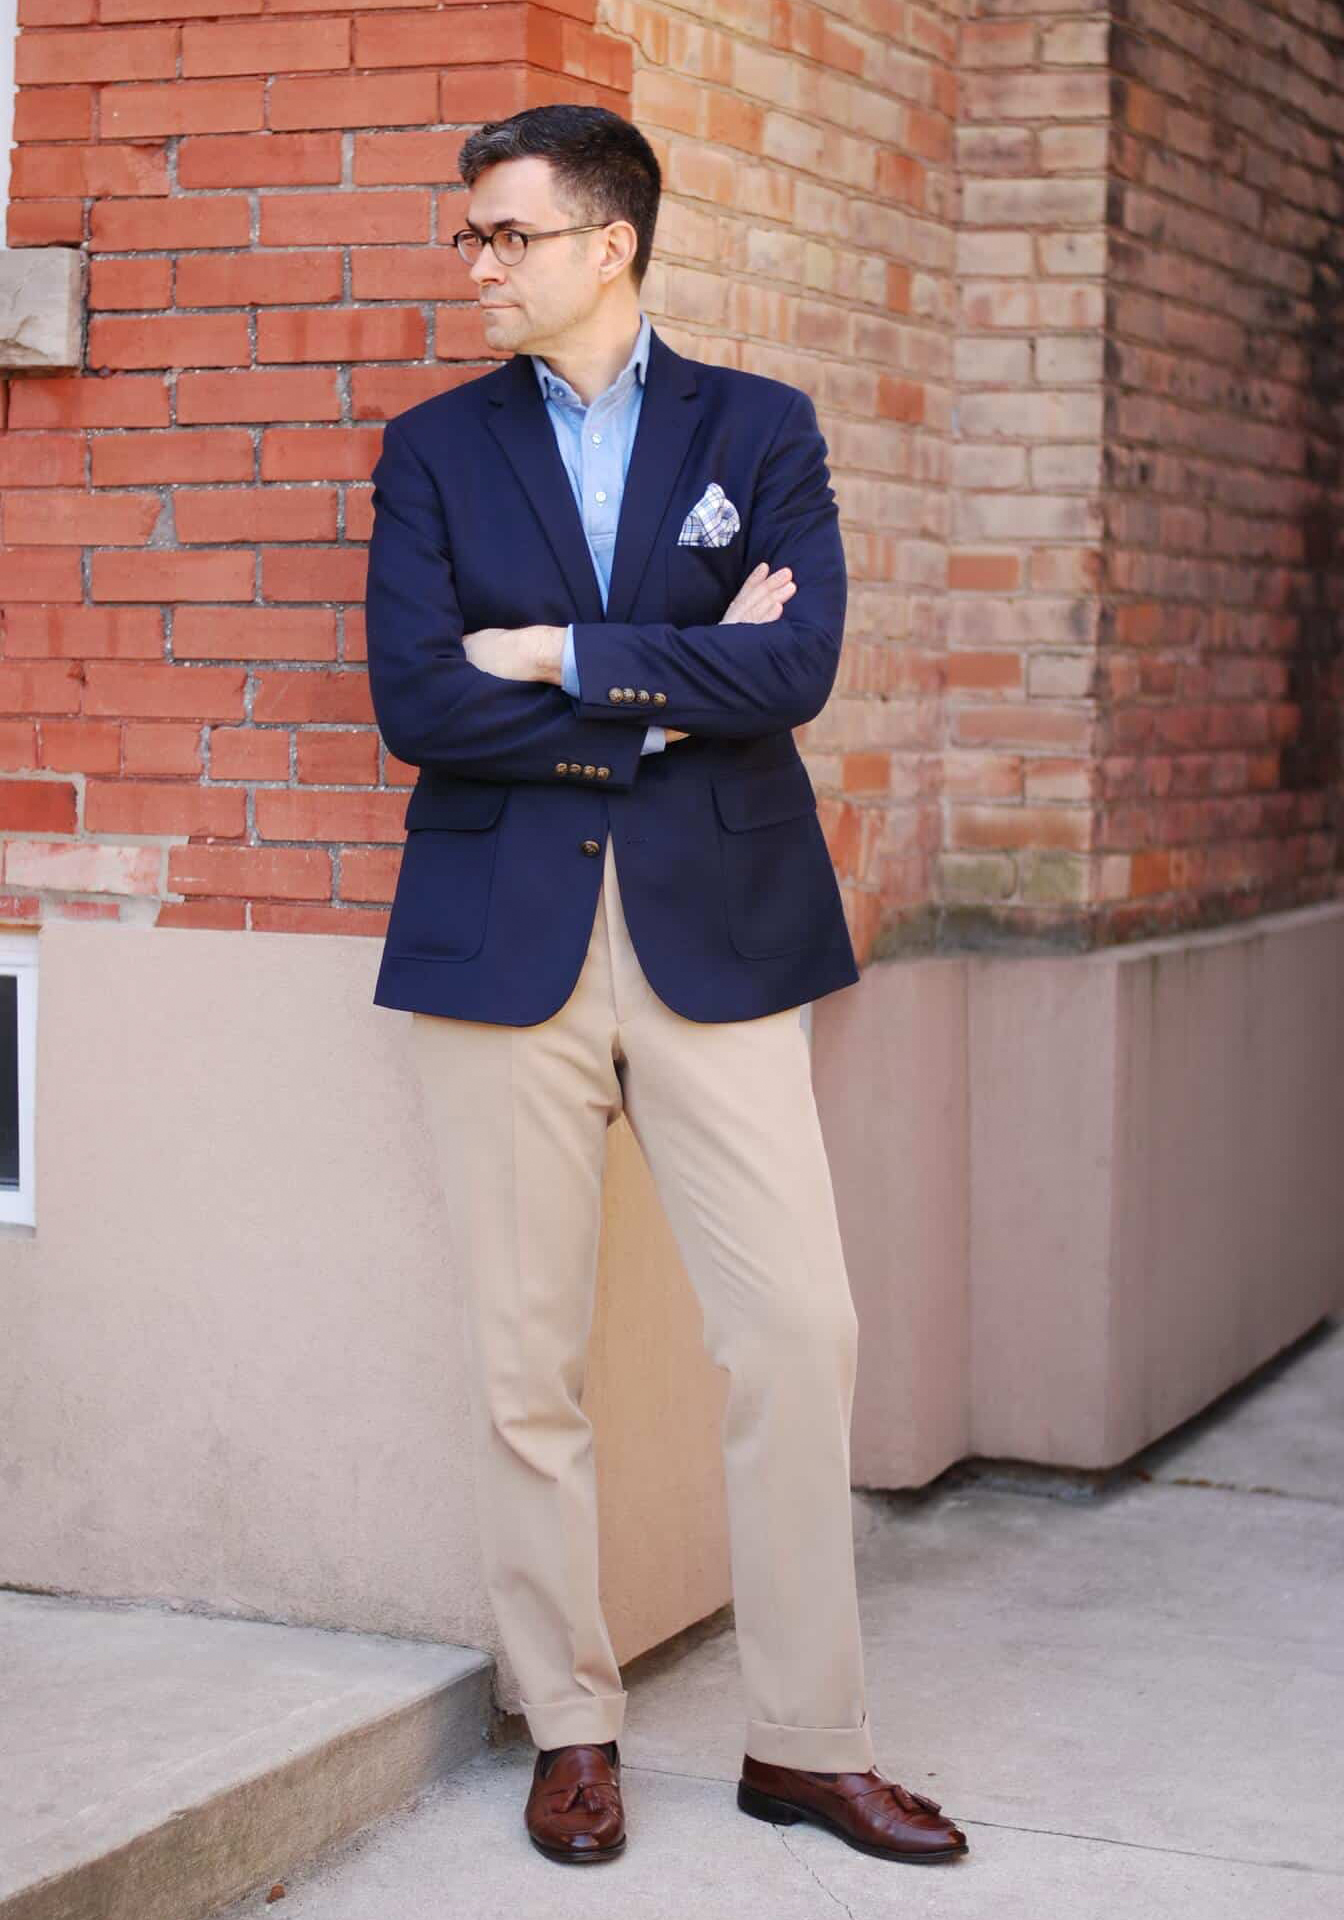 Navy blue suit jacket, blue shirt, tan pants, and brown shoes